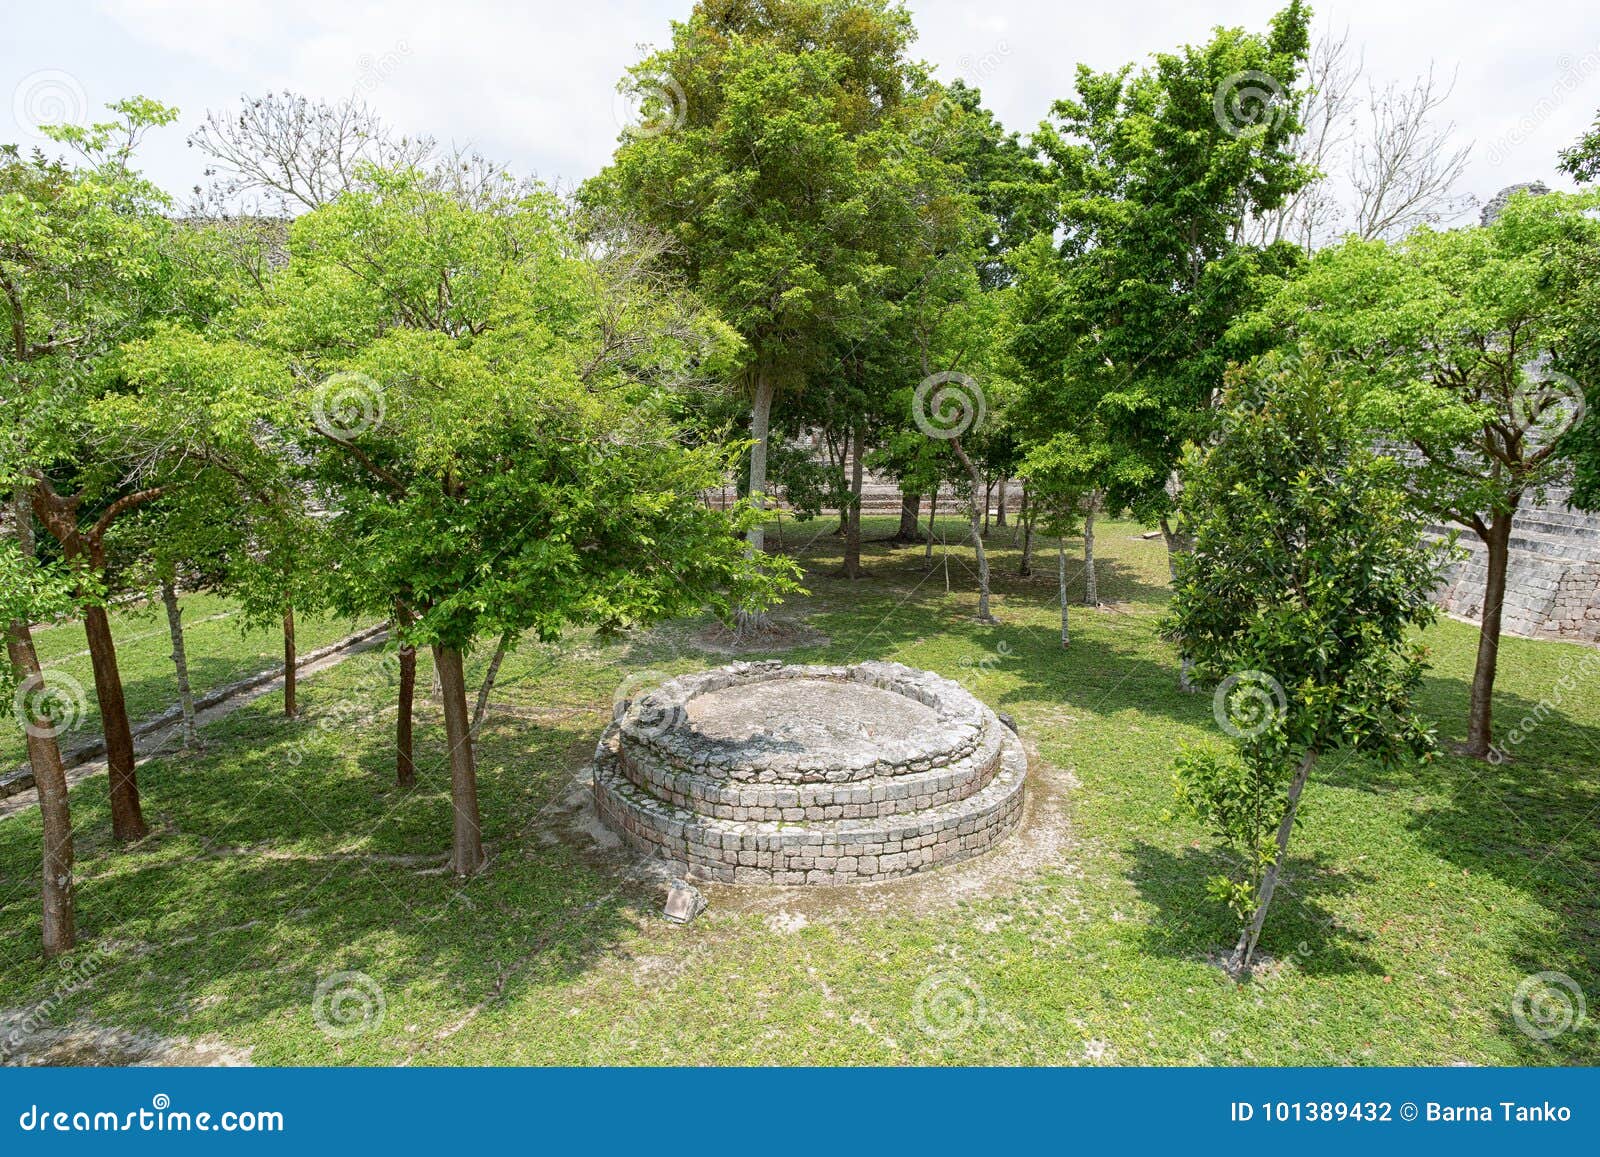 becan archaeological park in yucatan mexico